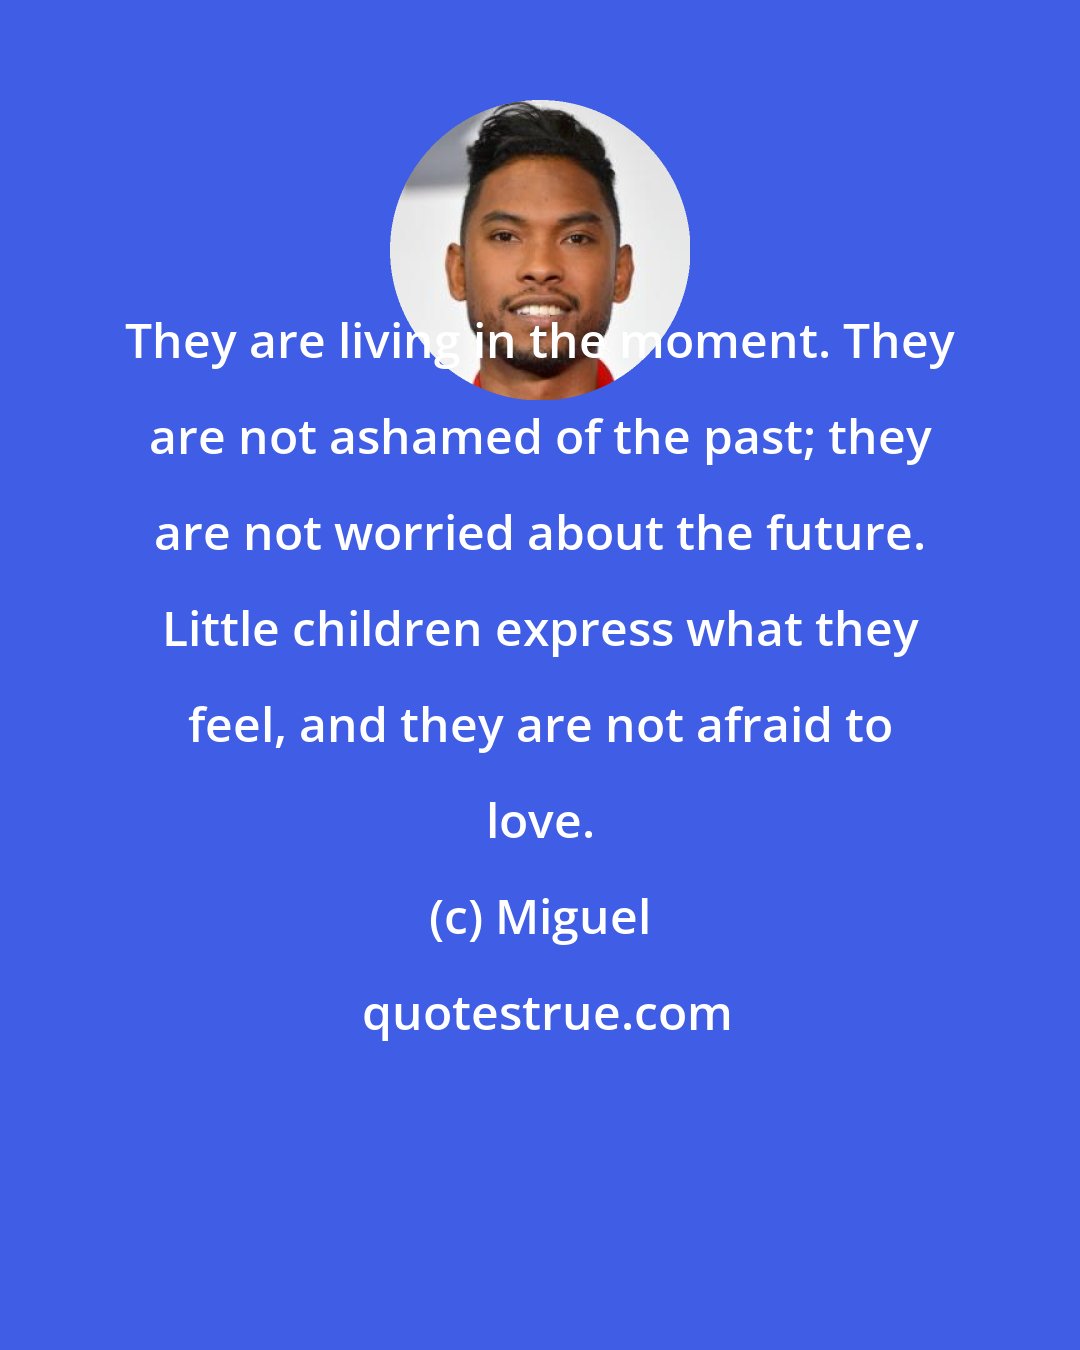 Miguel: They are living in the moment. They are not ashamed of the past; they are not worried about the future. Little children express what they feel, and they are not afraid to love.